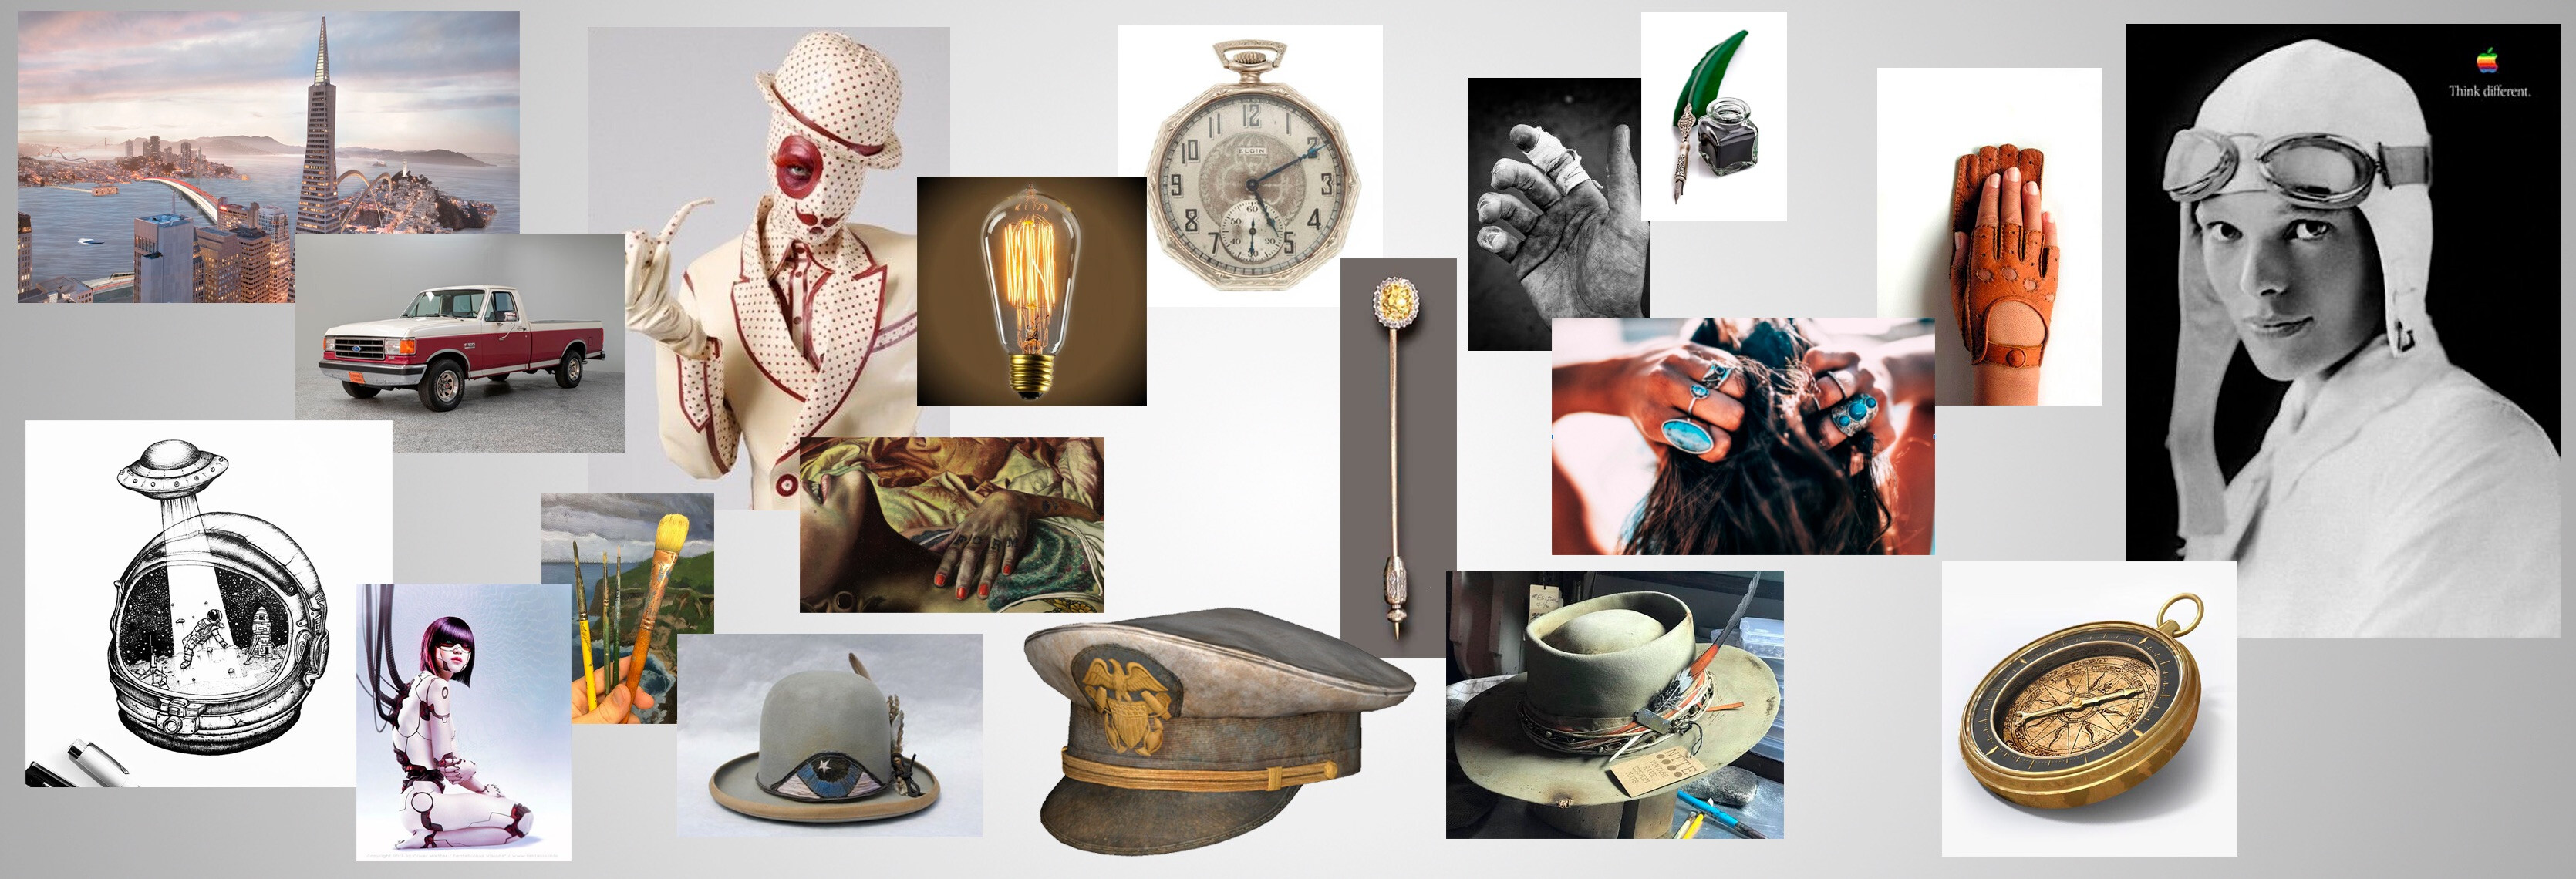 Banner collage of inspiration imagery Vs. used to design the One Hat One Hand archetypes.